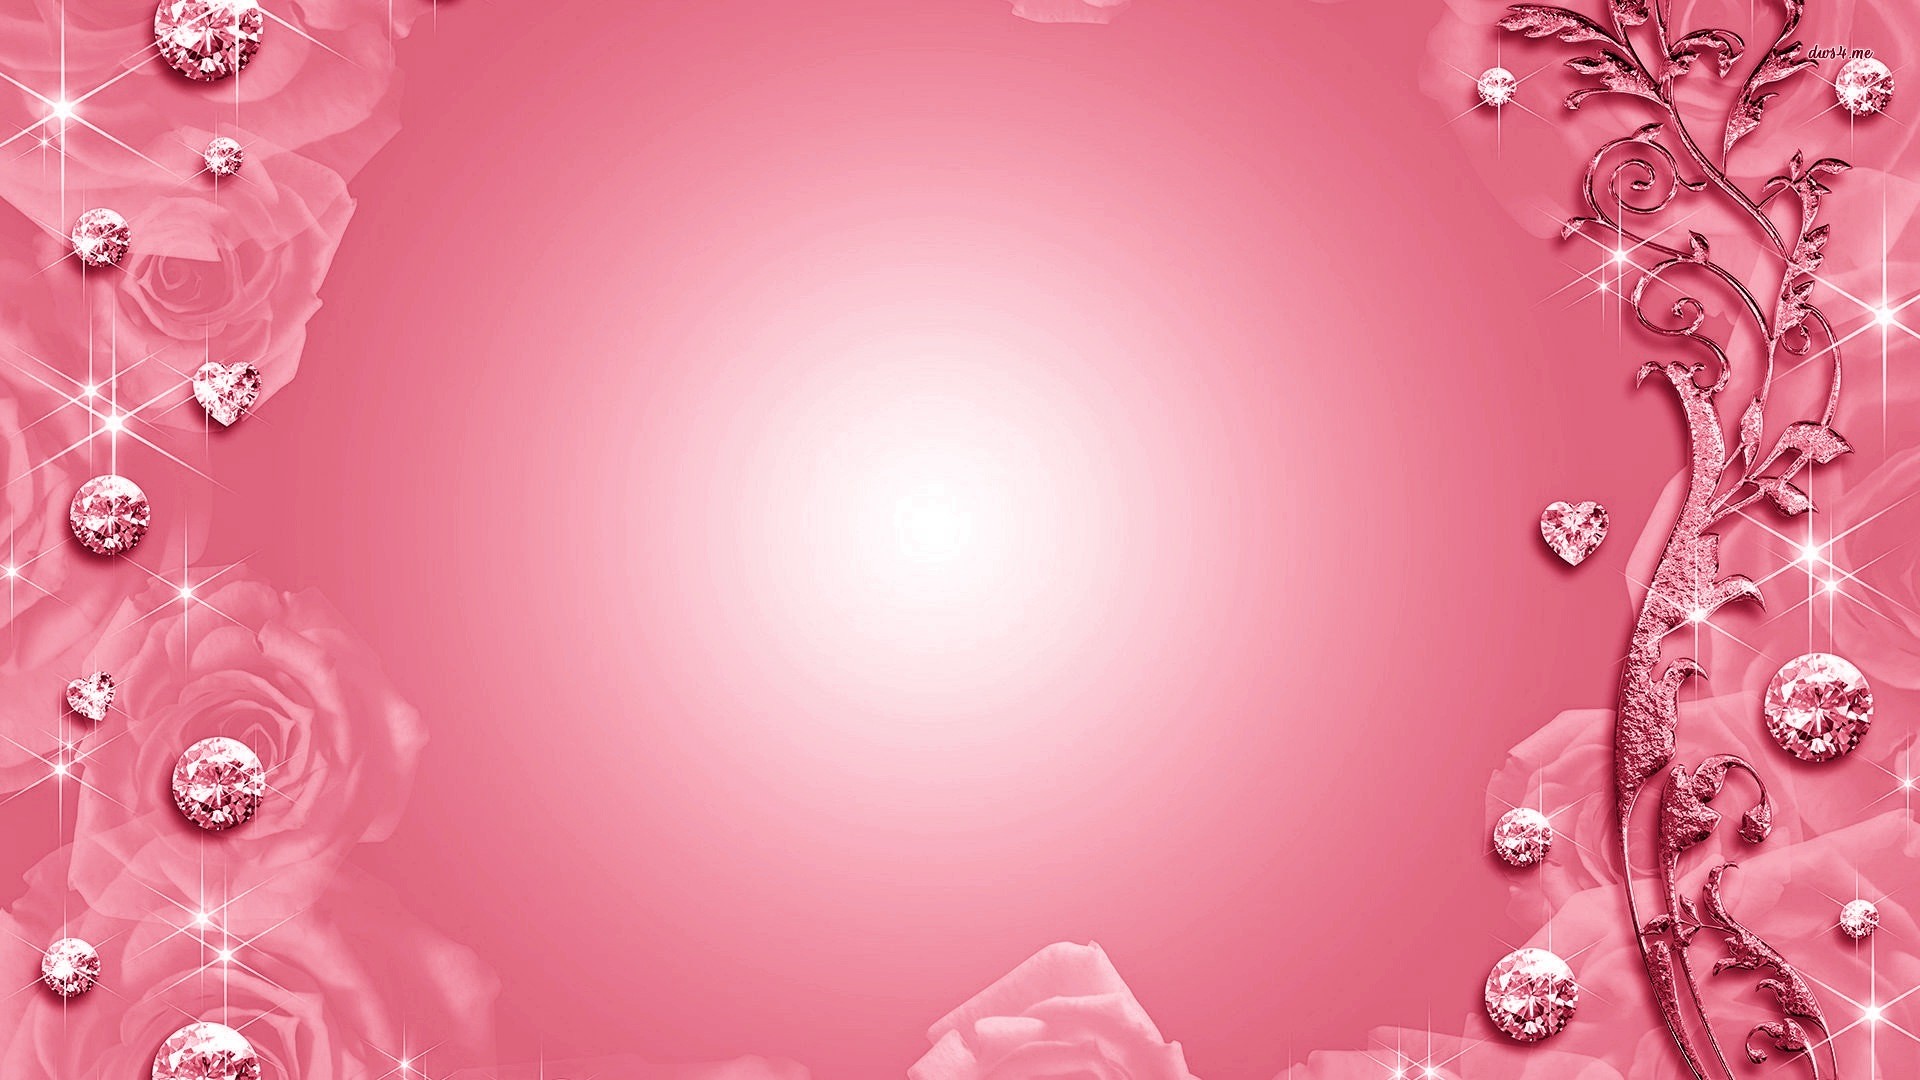 Download image Pink Diamond Desktop Wallpaper PC, Android, iPhone and